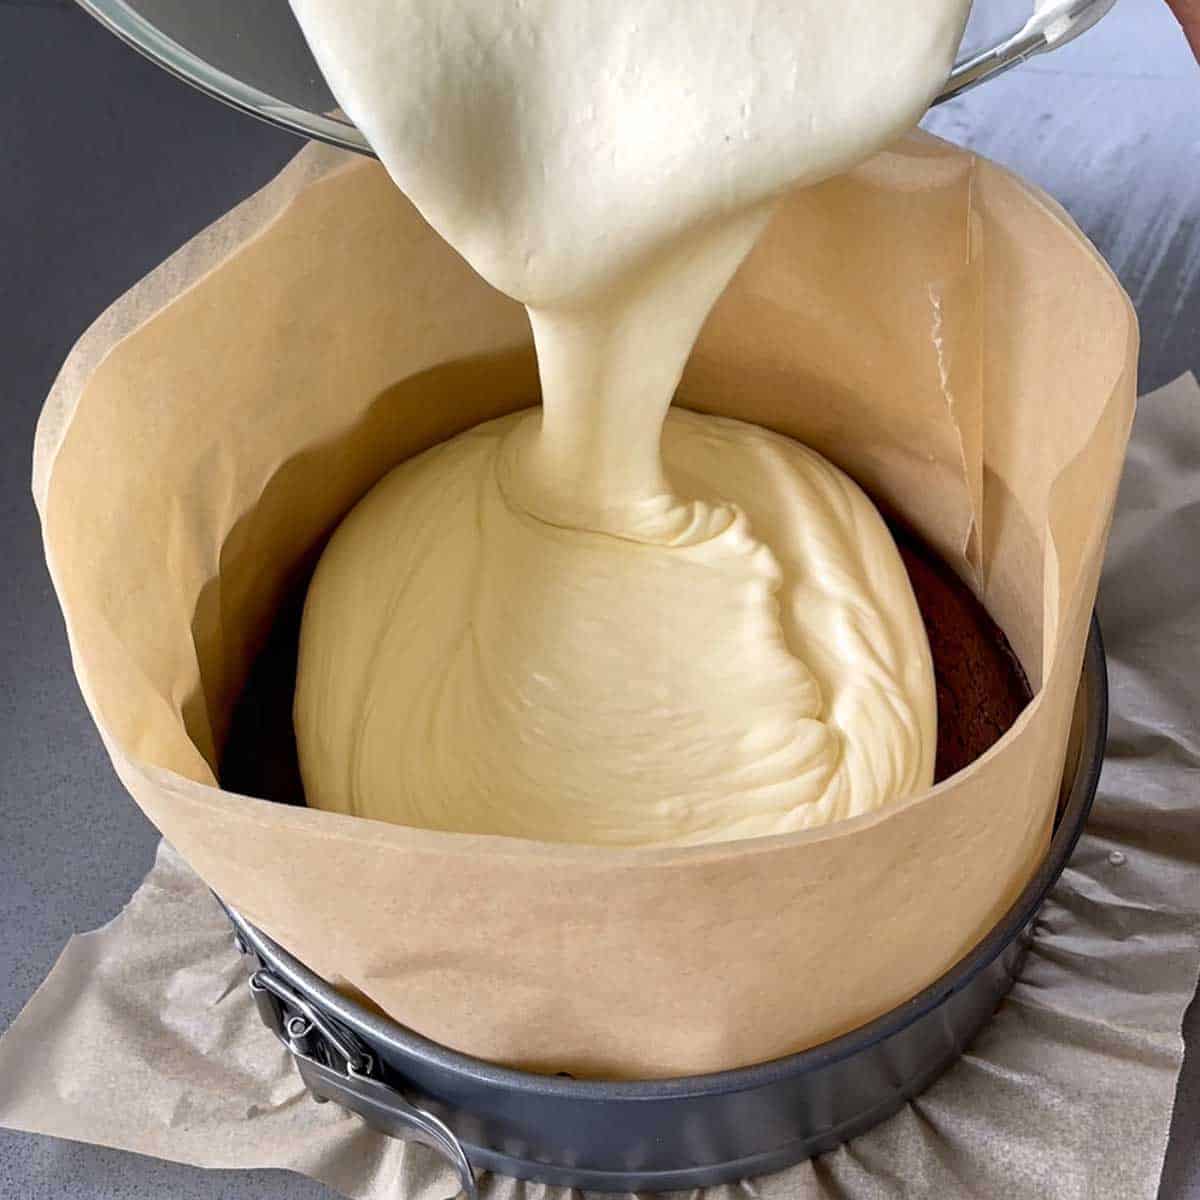 white chocolate mousse being poured into a lined cake tin.